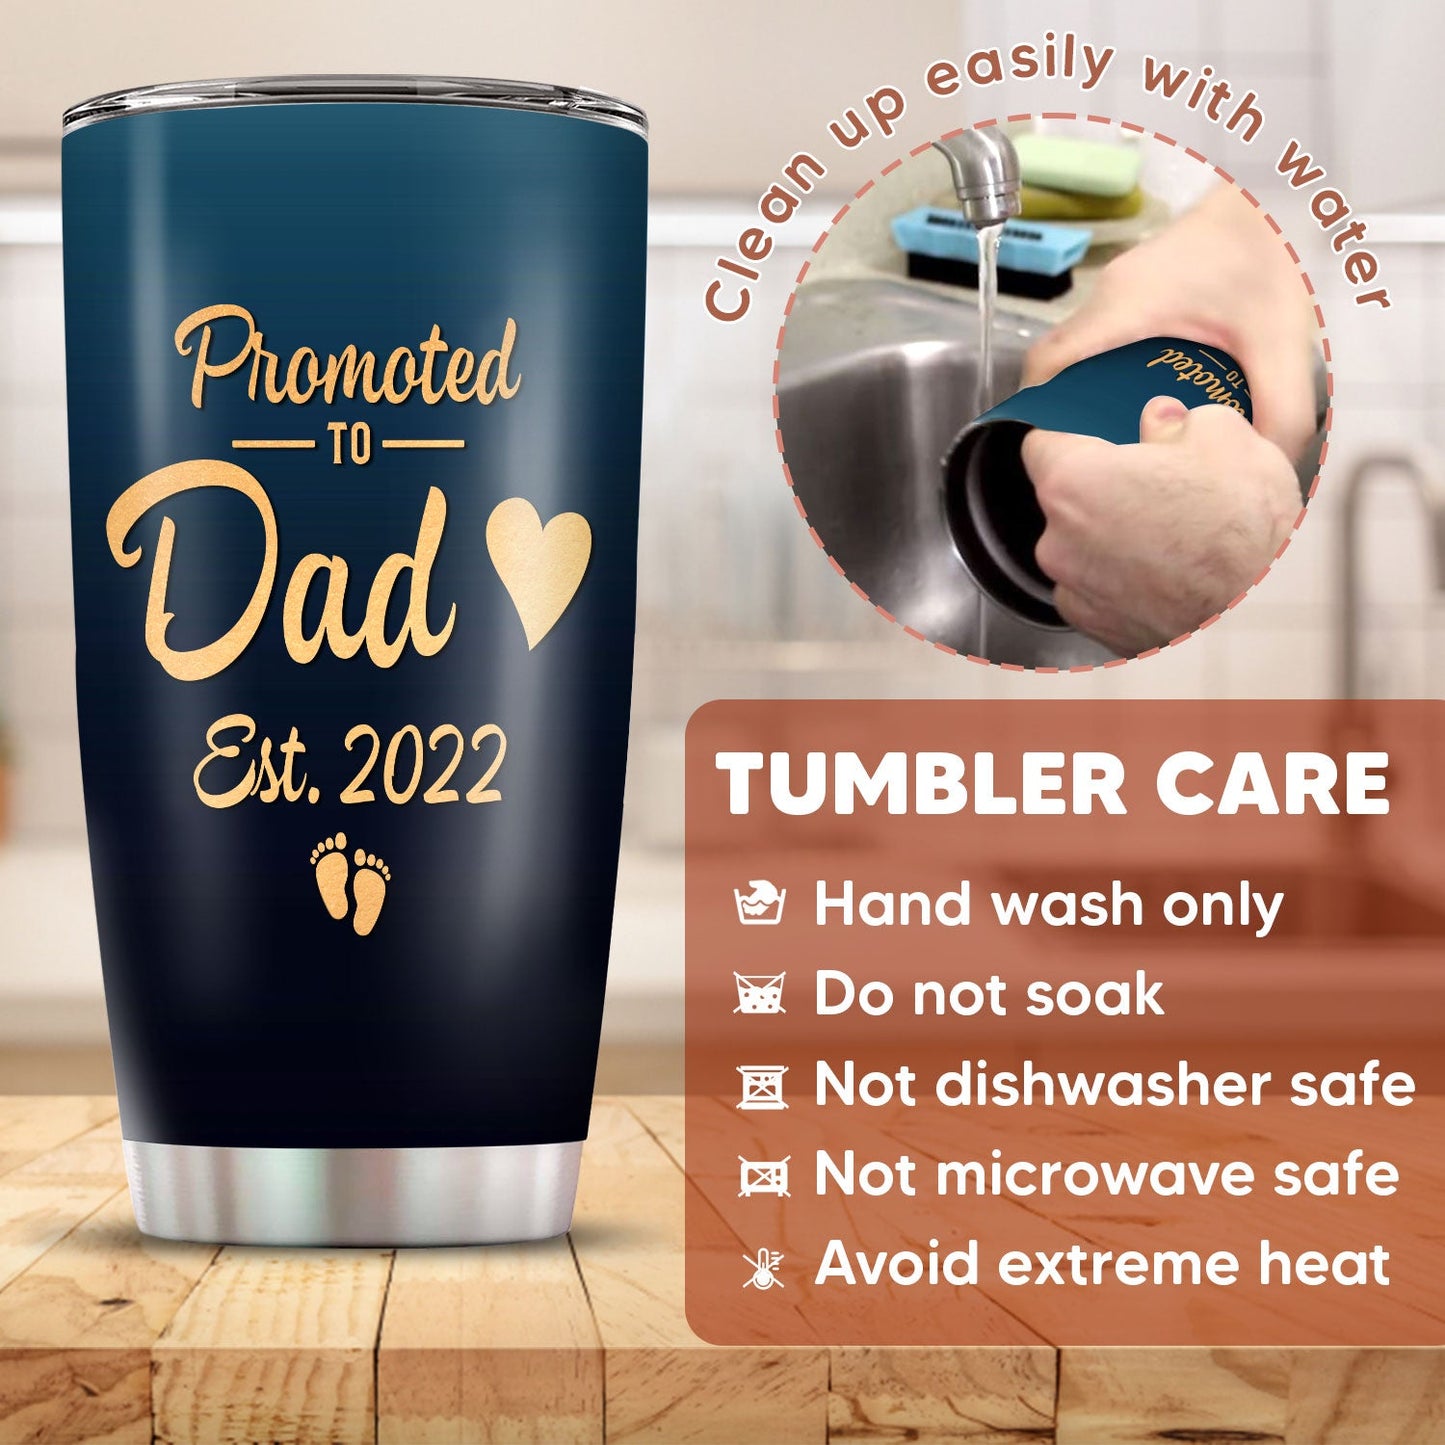 First Time Fathers Day Gifts Promoted To Dad 2022 20Oz Tumbler